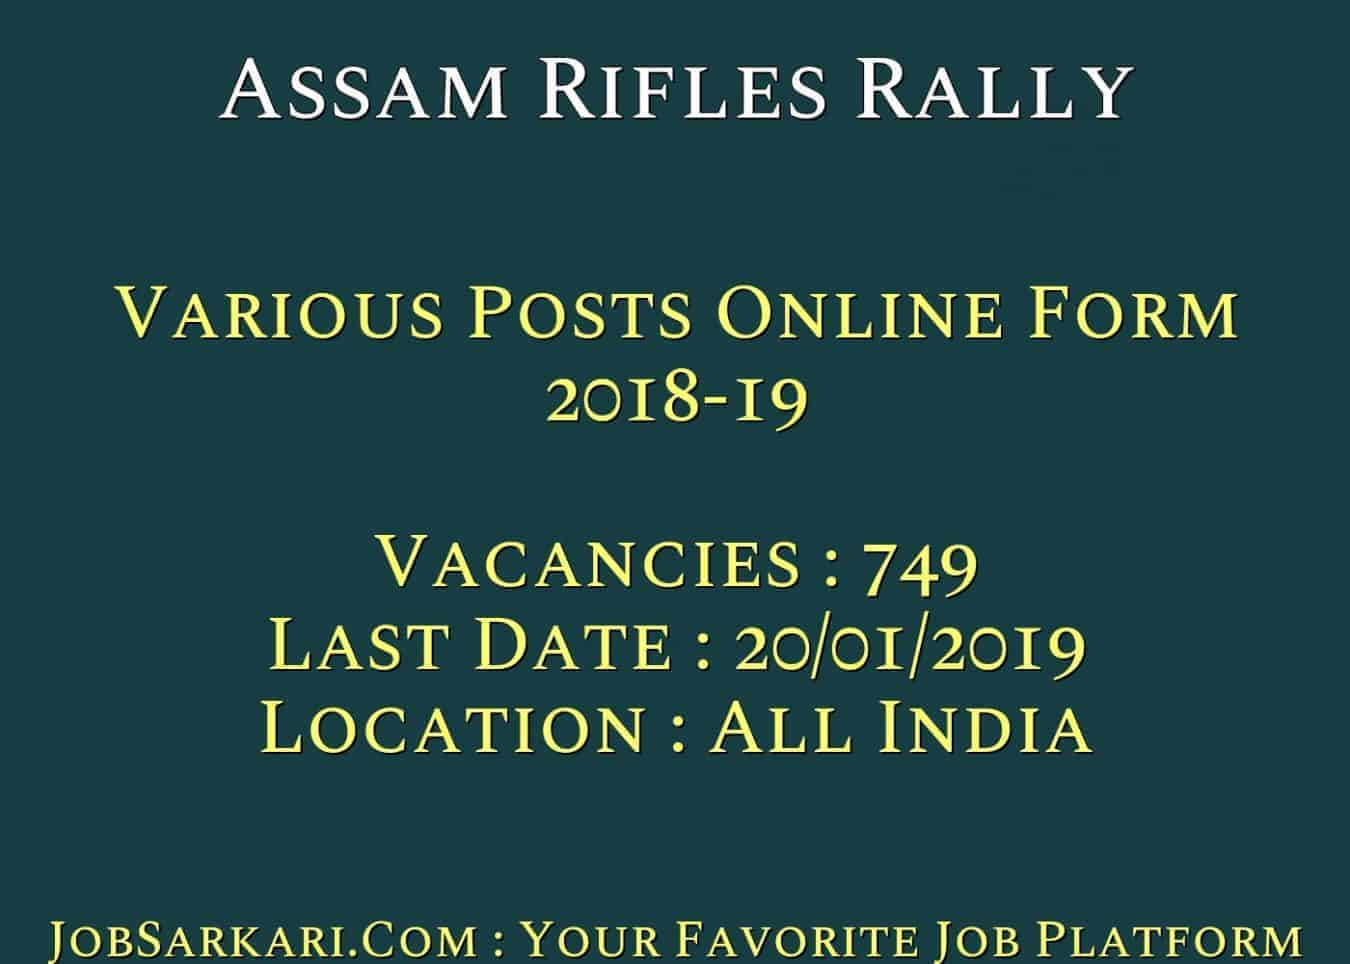 Assam Rifles Rally For Various Posts Online Form 2018-19